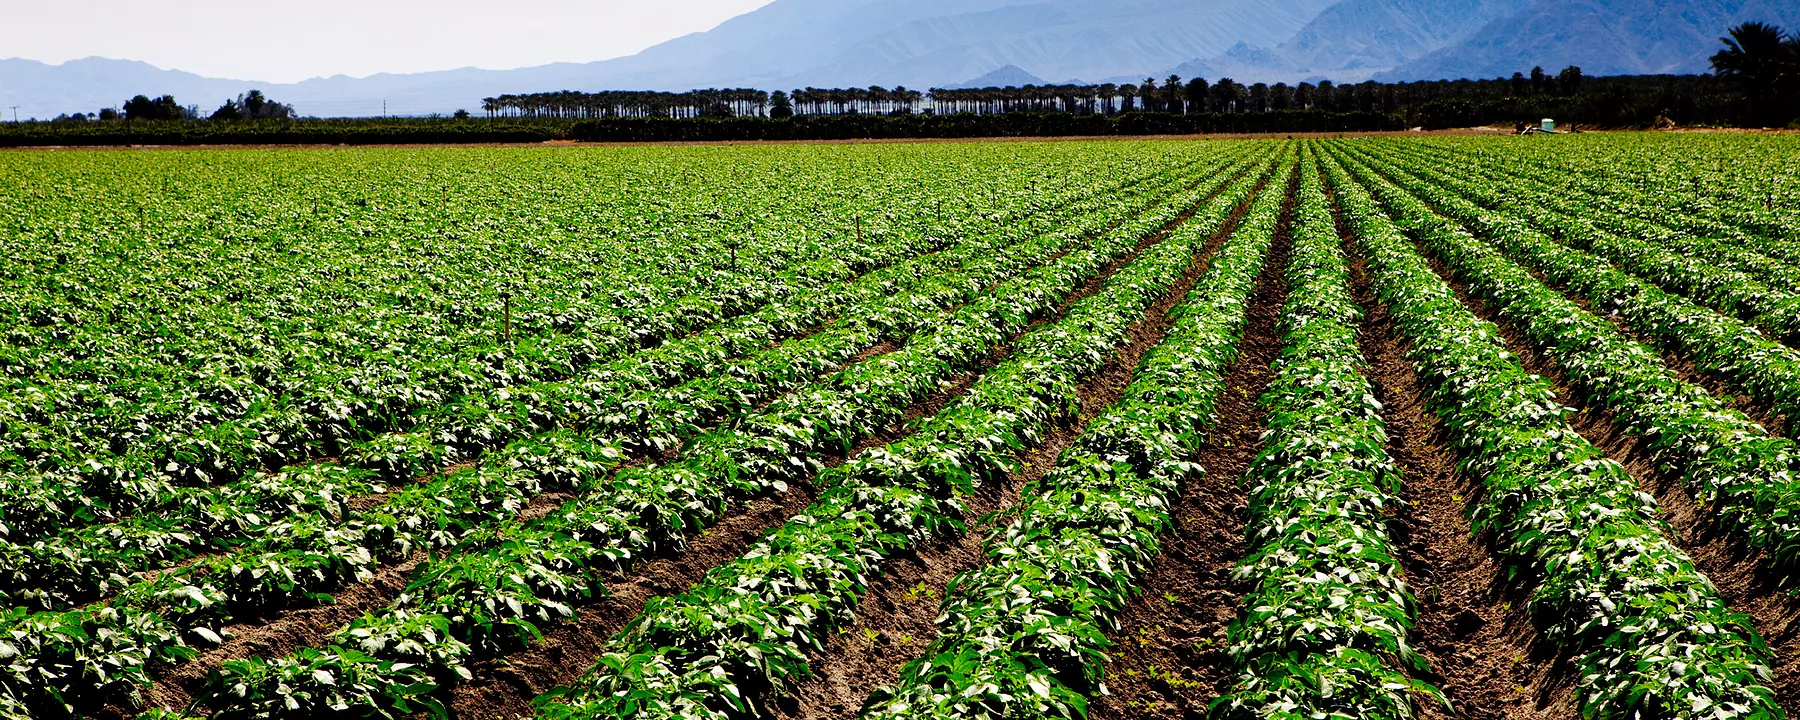 A large field of crops with mountains in the background